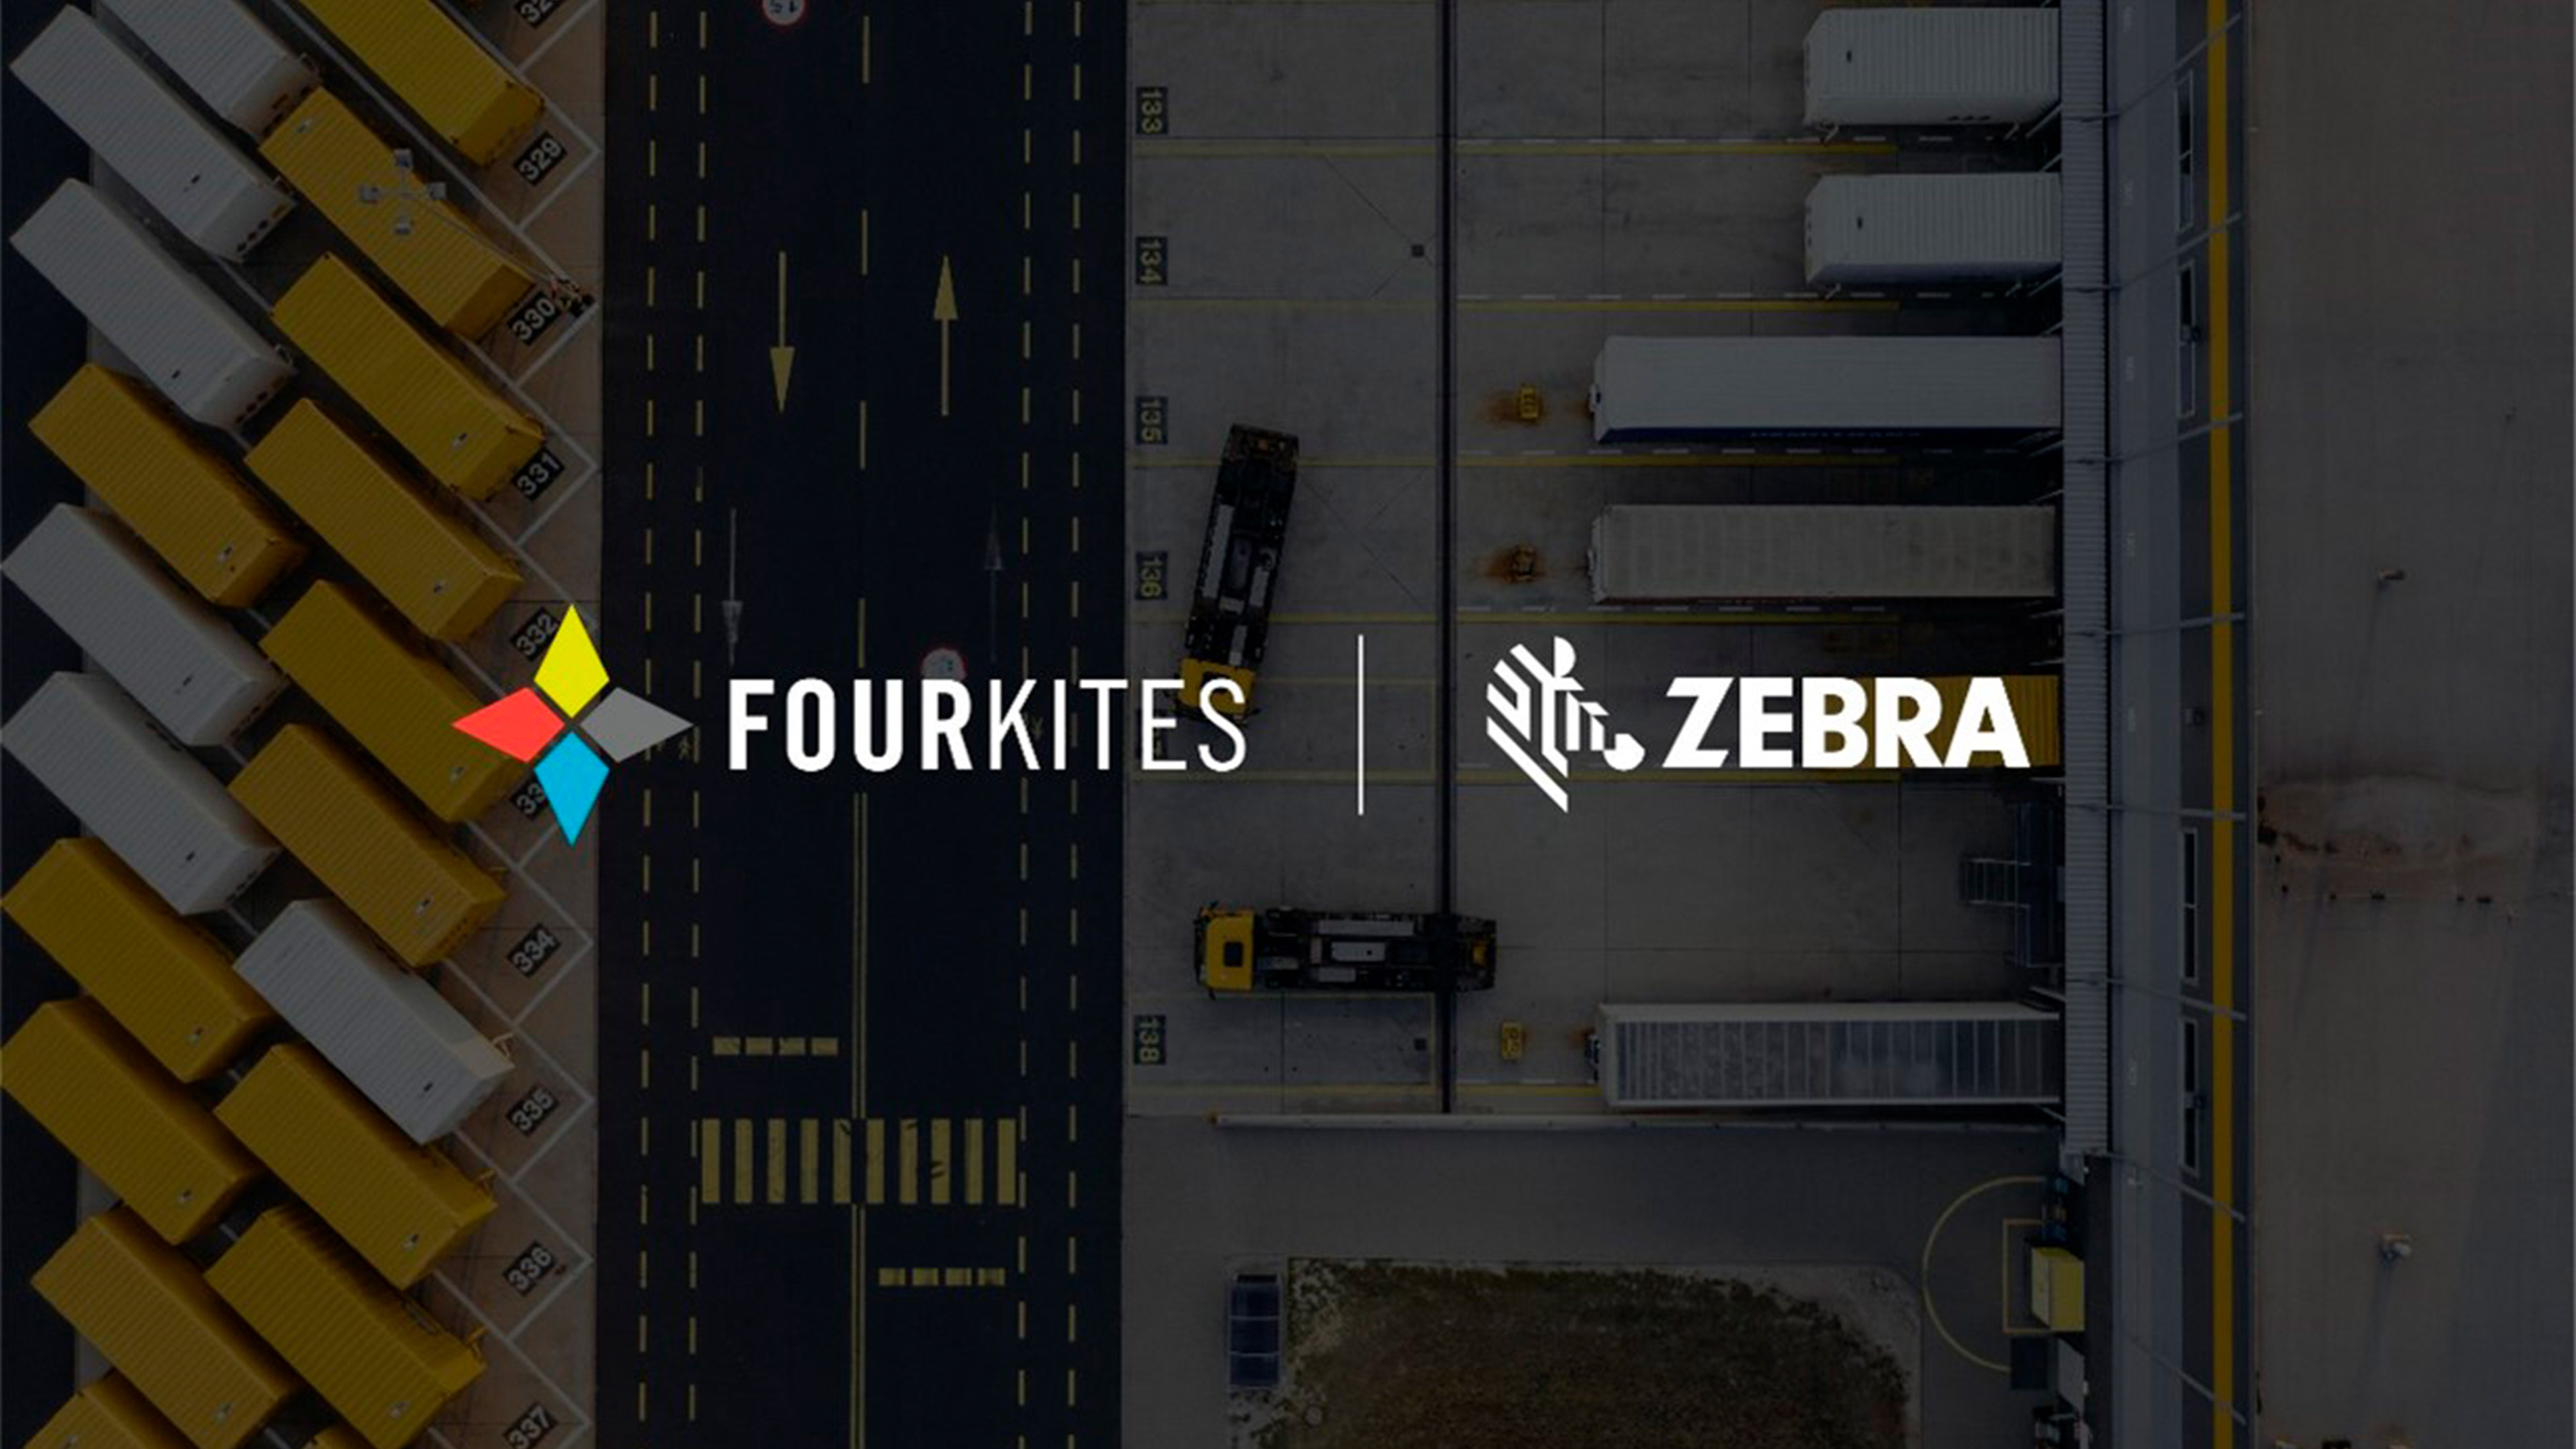 HOW ZEBRA IS USING THE FOURKITES PLATFORM TO IMPROVE ORDER MANAGEMENT AND FULFILLMENT